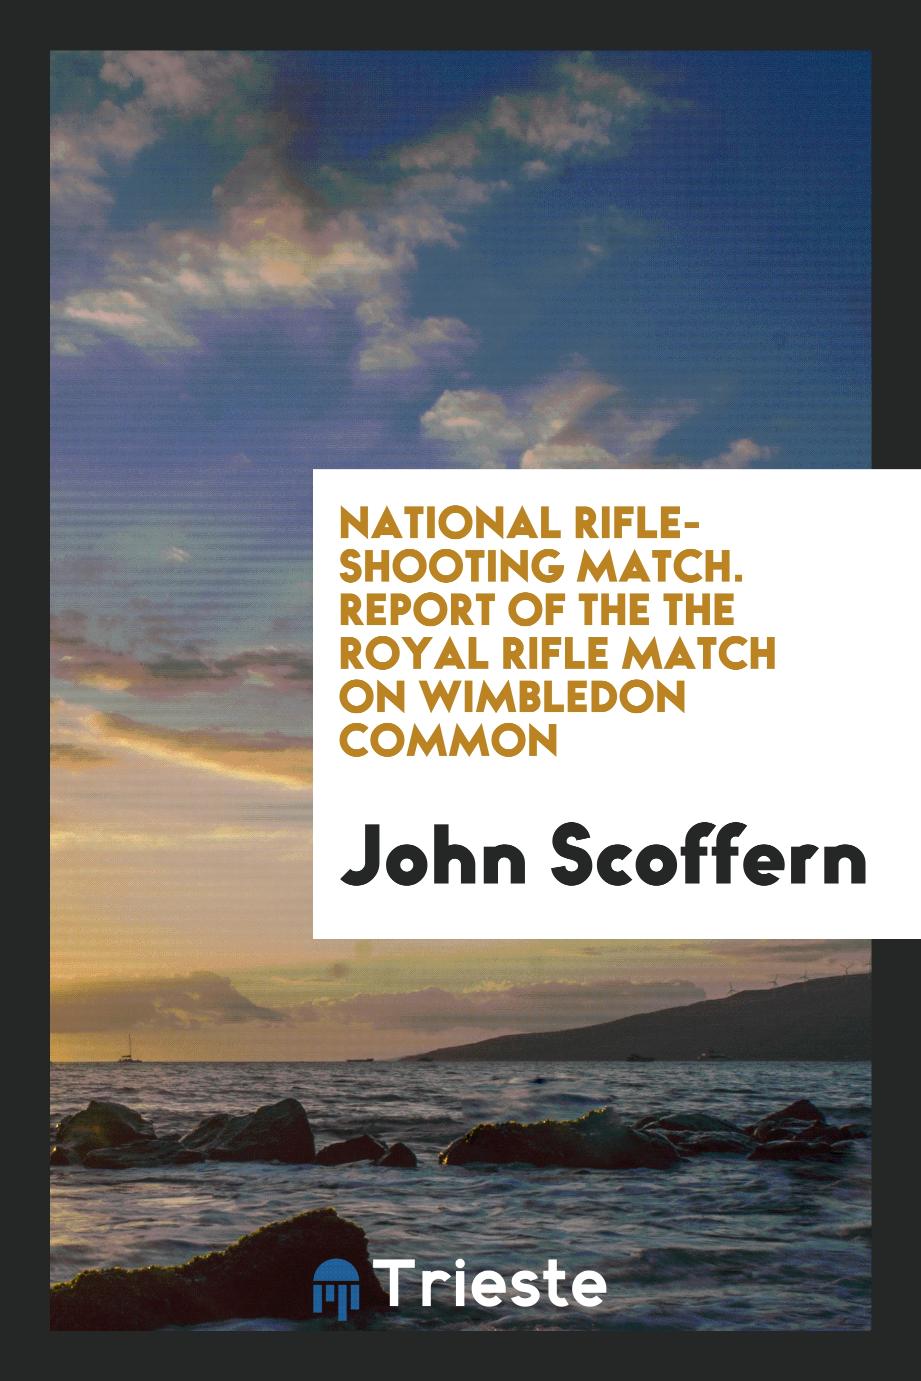 National Rifle-Shooting Match. Report of the the Royal Rifle Match on Wimbledon Common